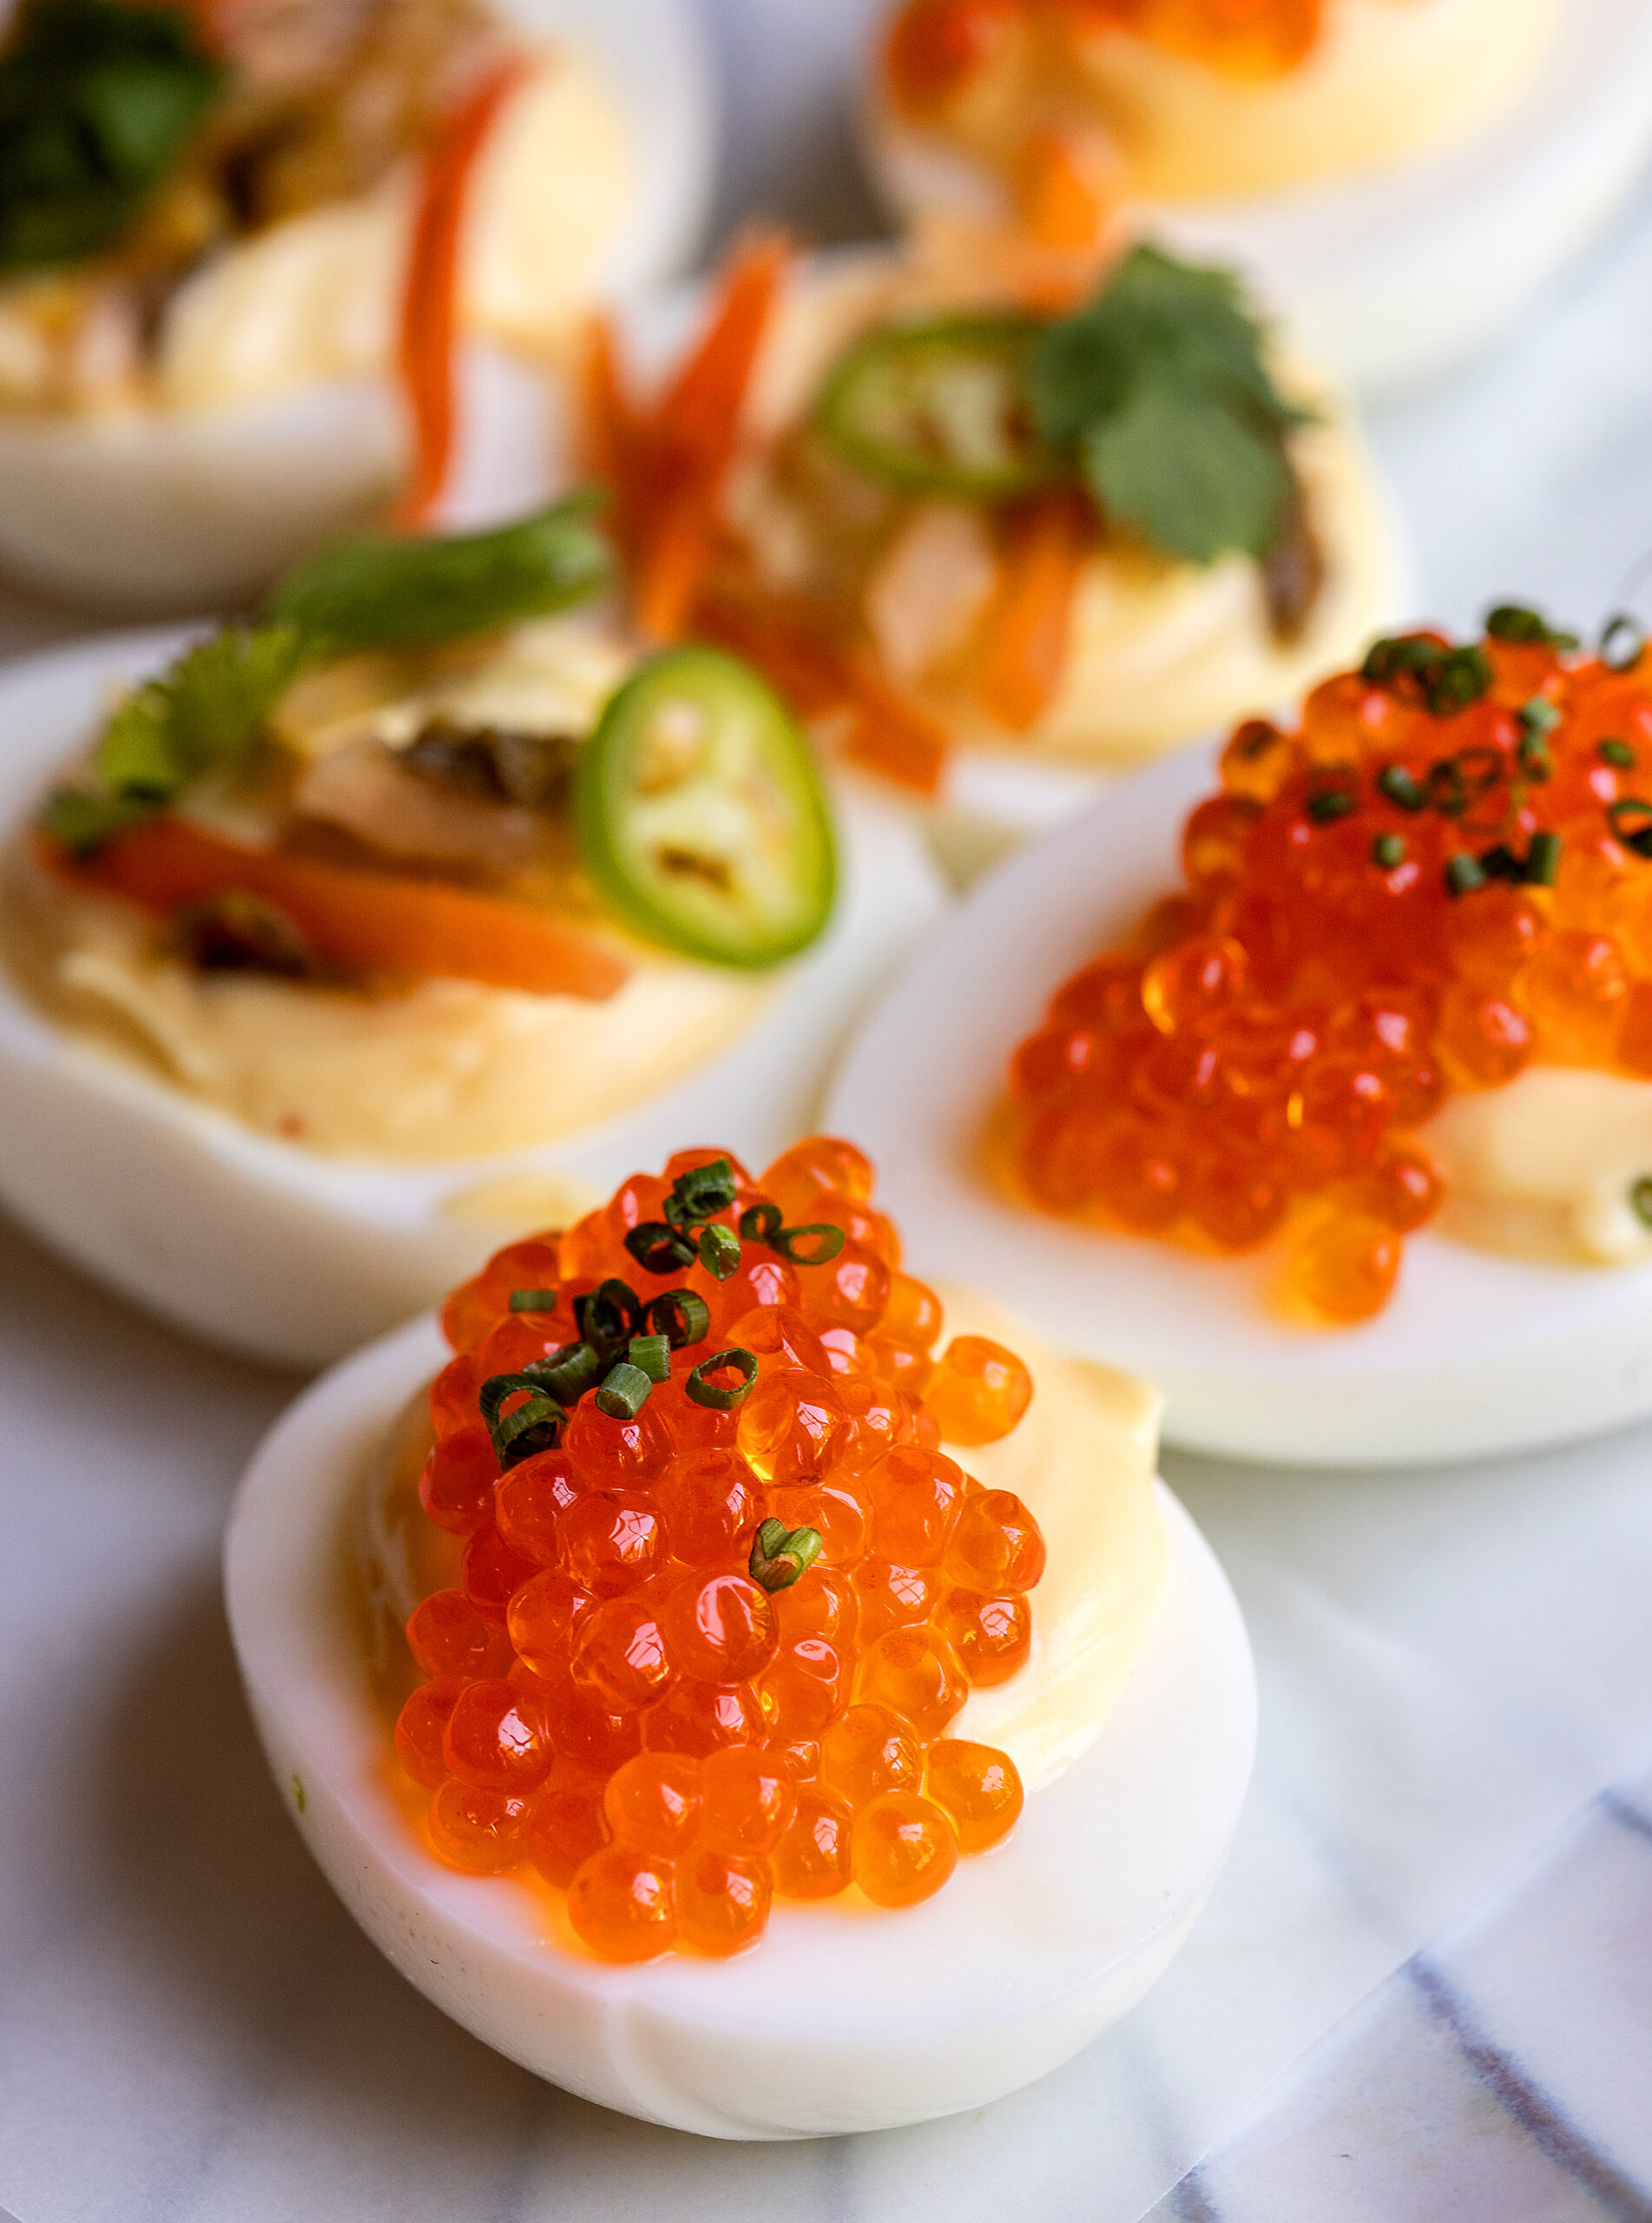 Deviled eggs with trout roe and chives from the weekend brunch menu at The Madrona in Healdsburg, Friday, July 14, 2023. (John Burgess / The Press Democrat)